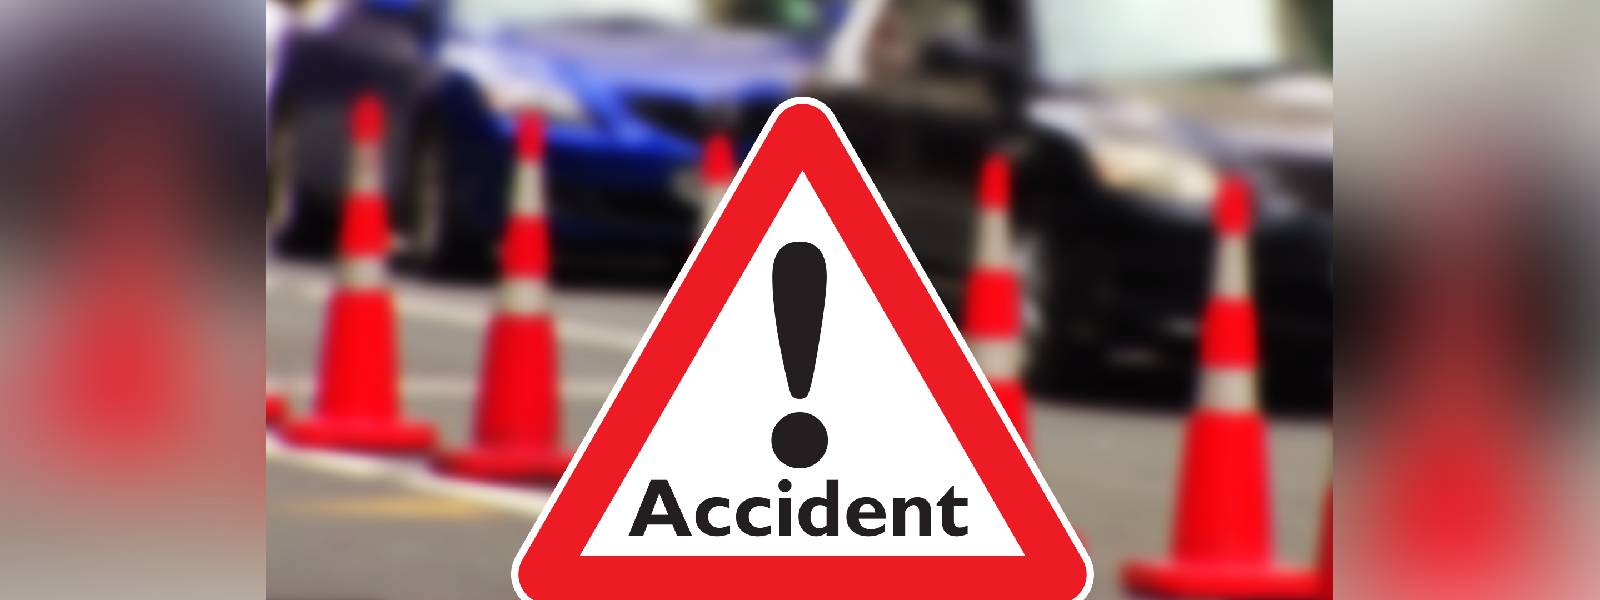 07 deaths due to road accidents on Monday (26): Police